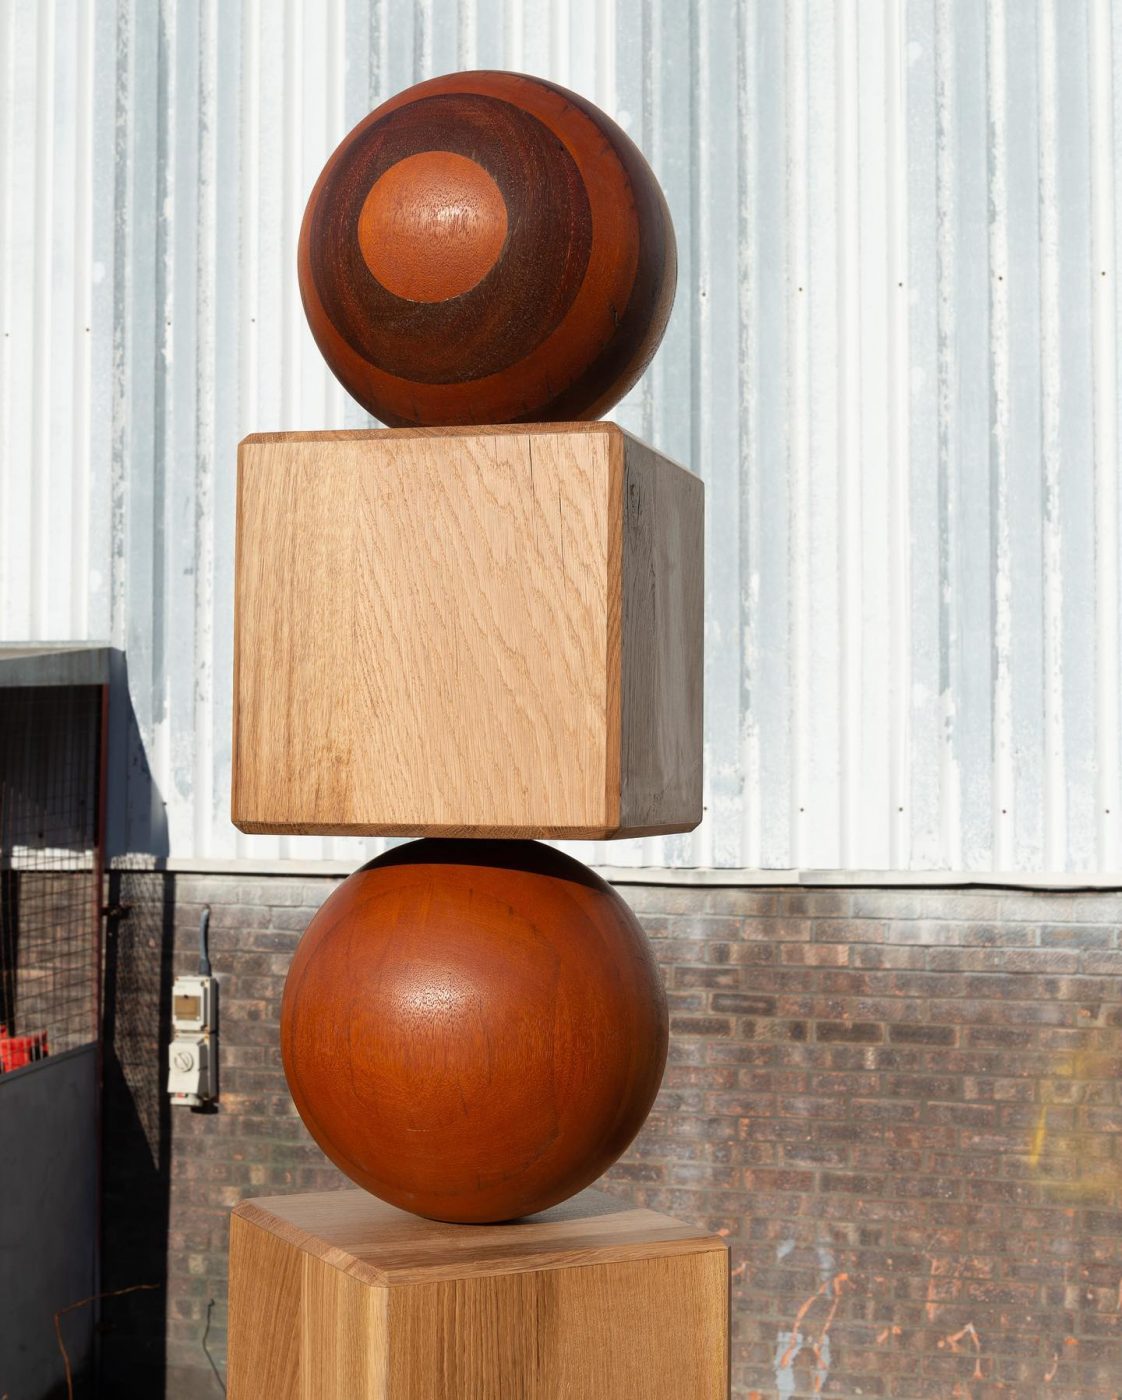 ball-‘n-box-made-using-100-reclaimed-timbers.-the-radiant-rich-rouge-and-burnt-orange-spheres-are-